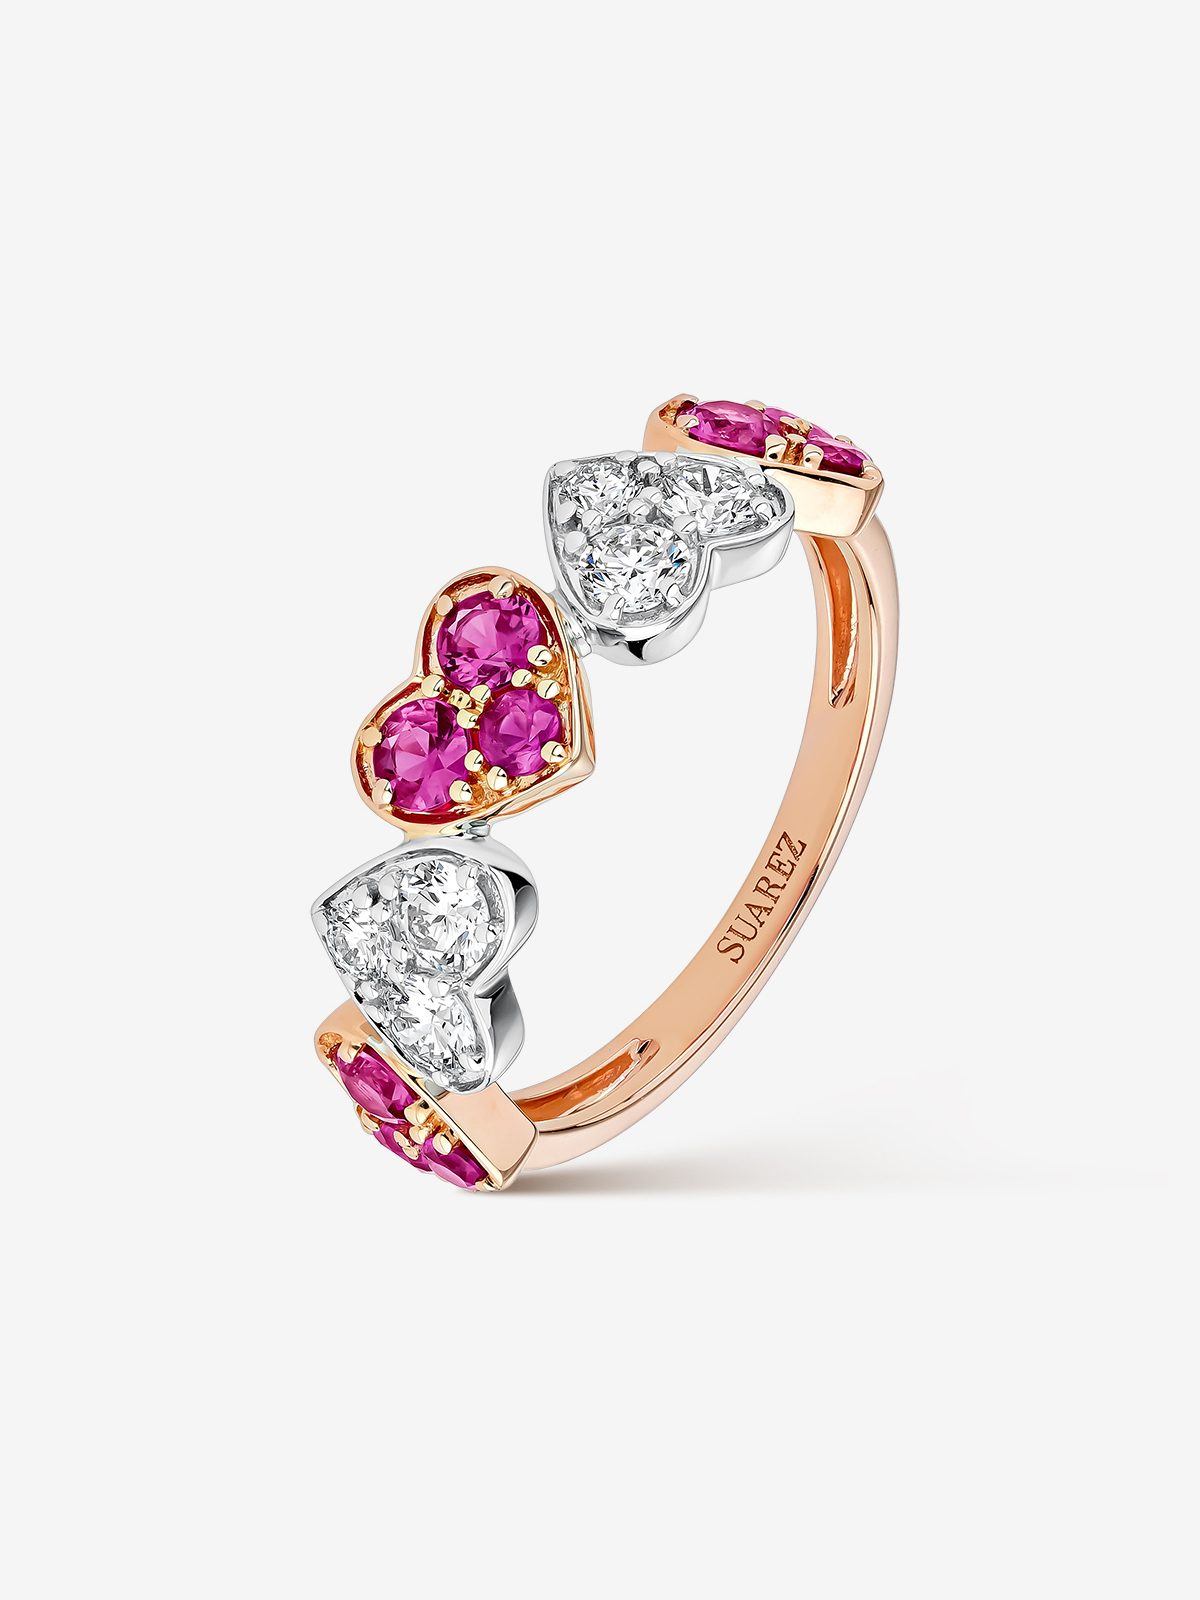 Rose gold and 18kt white gold hearts ring with pink sapphires and diamonds.